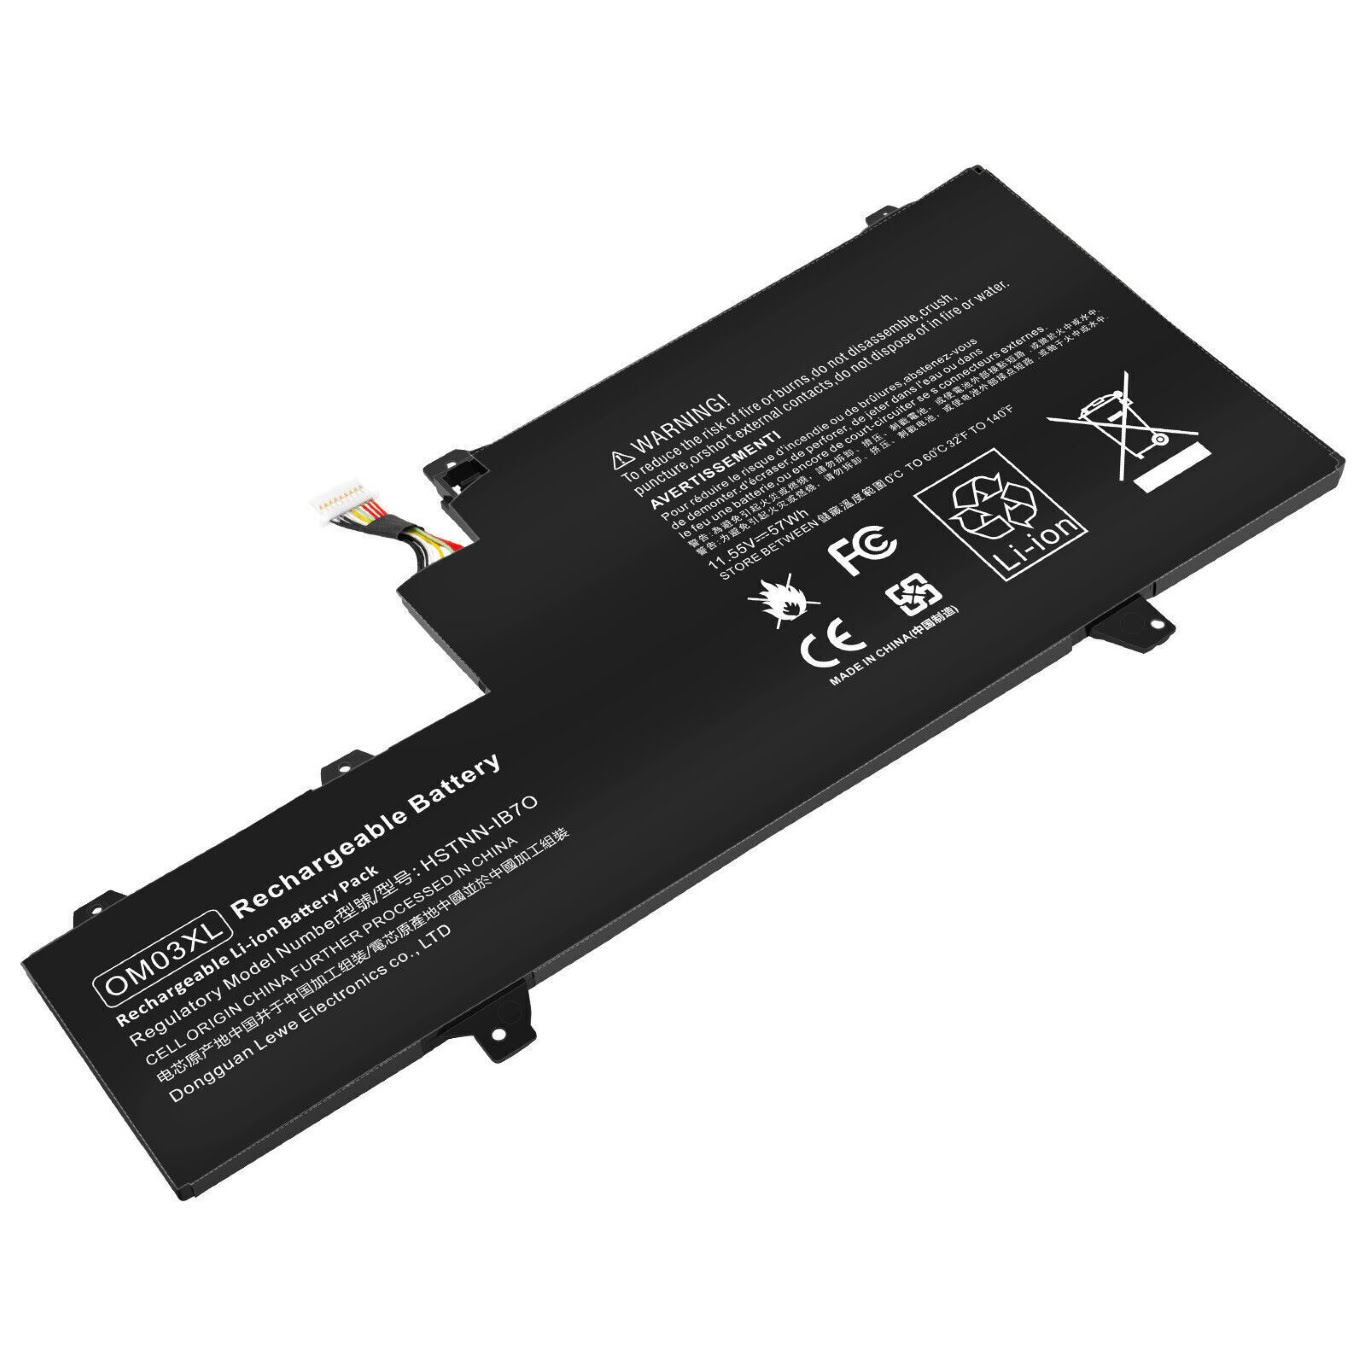 863167-171, 863167-1B1 replacement Laptop Battery for HP EliteBook x360 1030 G2 Series Notebook, 11.5v, 57wh, 3 cells